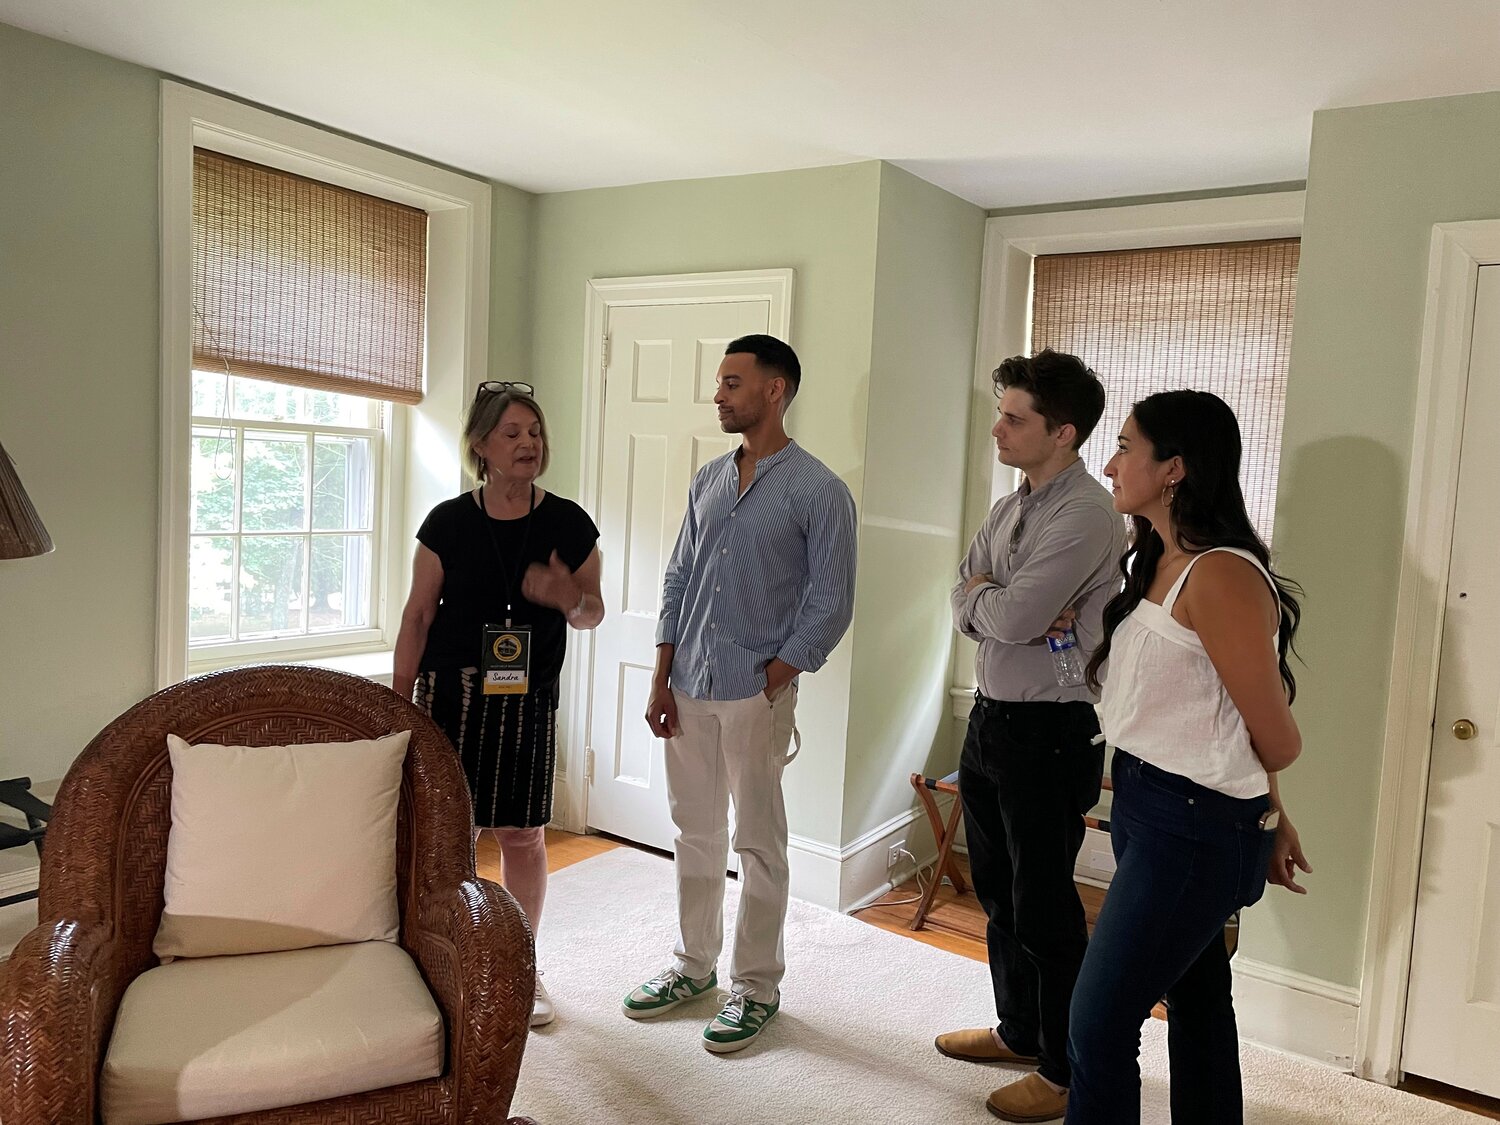 Sandy Gerger, a tour guide at the Oscar Hammerstein Museum and Theatre Education Center, tells “Tick, Tick...Boom!” cast members Noah J. Ricketts, Krystina Alabado and Andy Mientus about Highland Farm’s history.